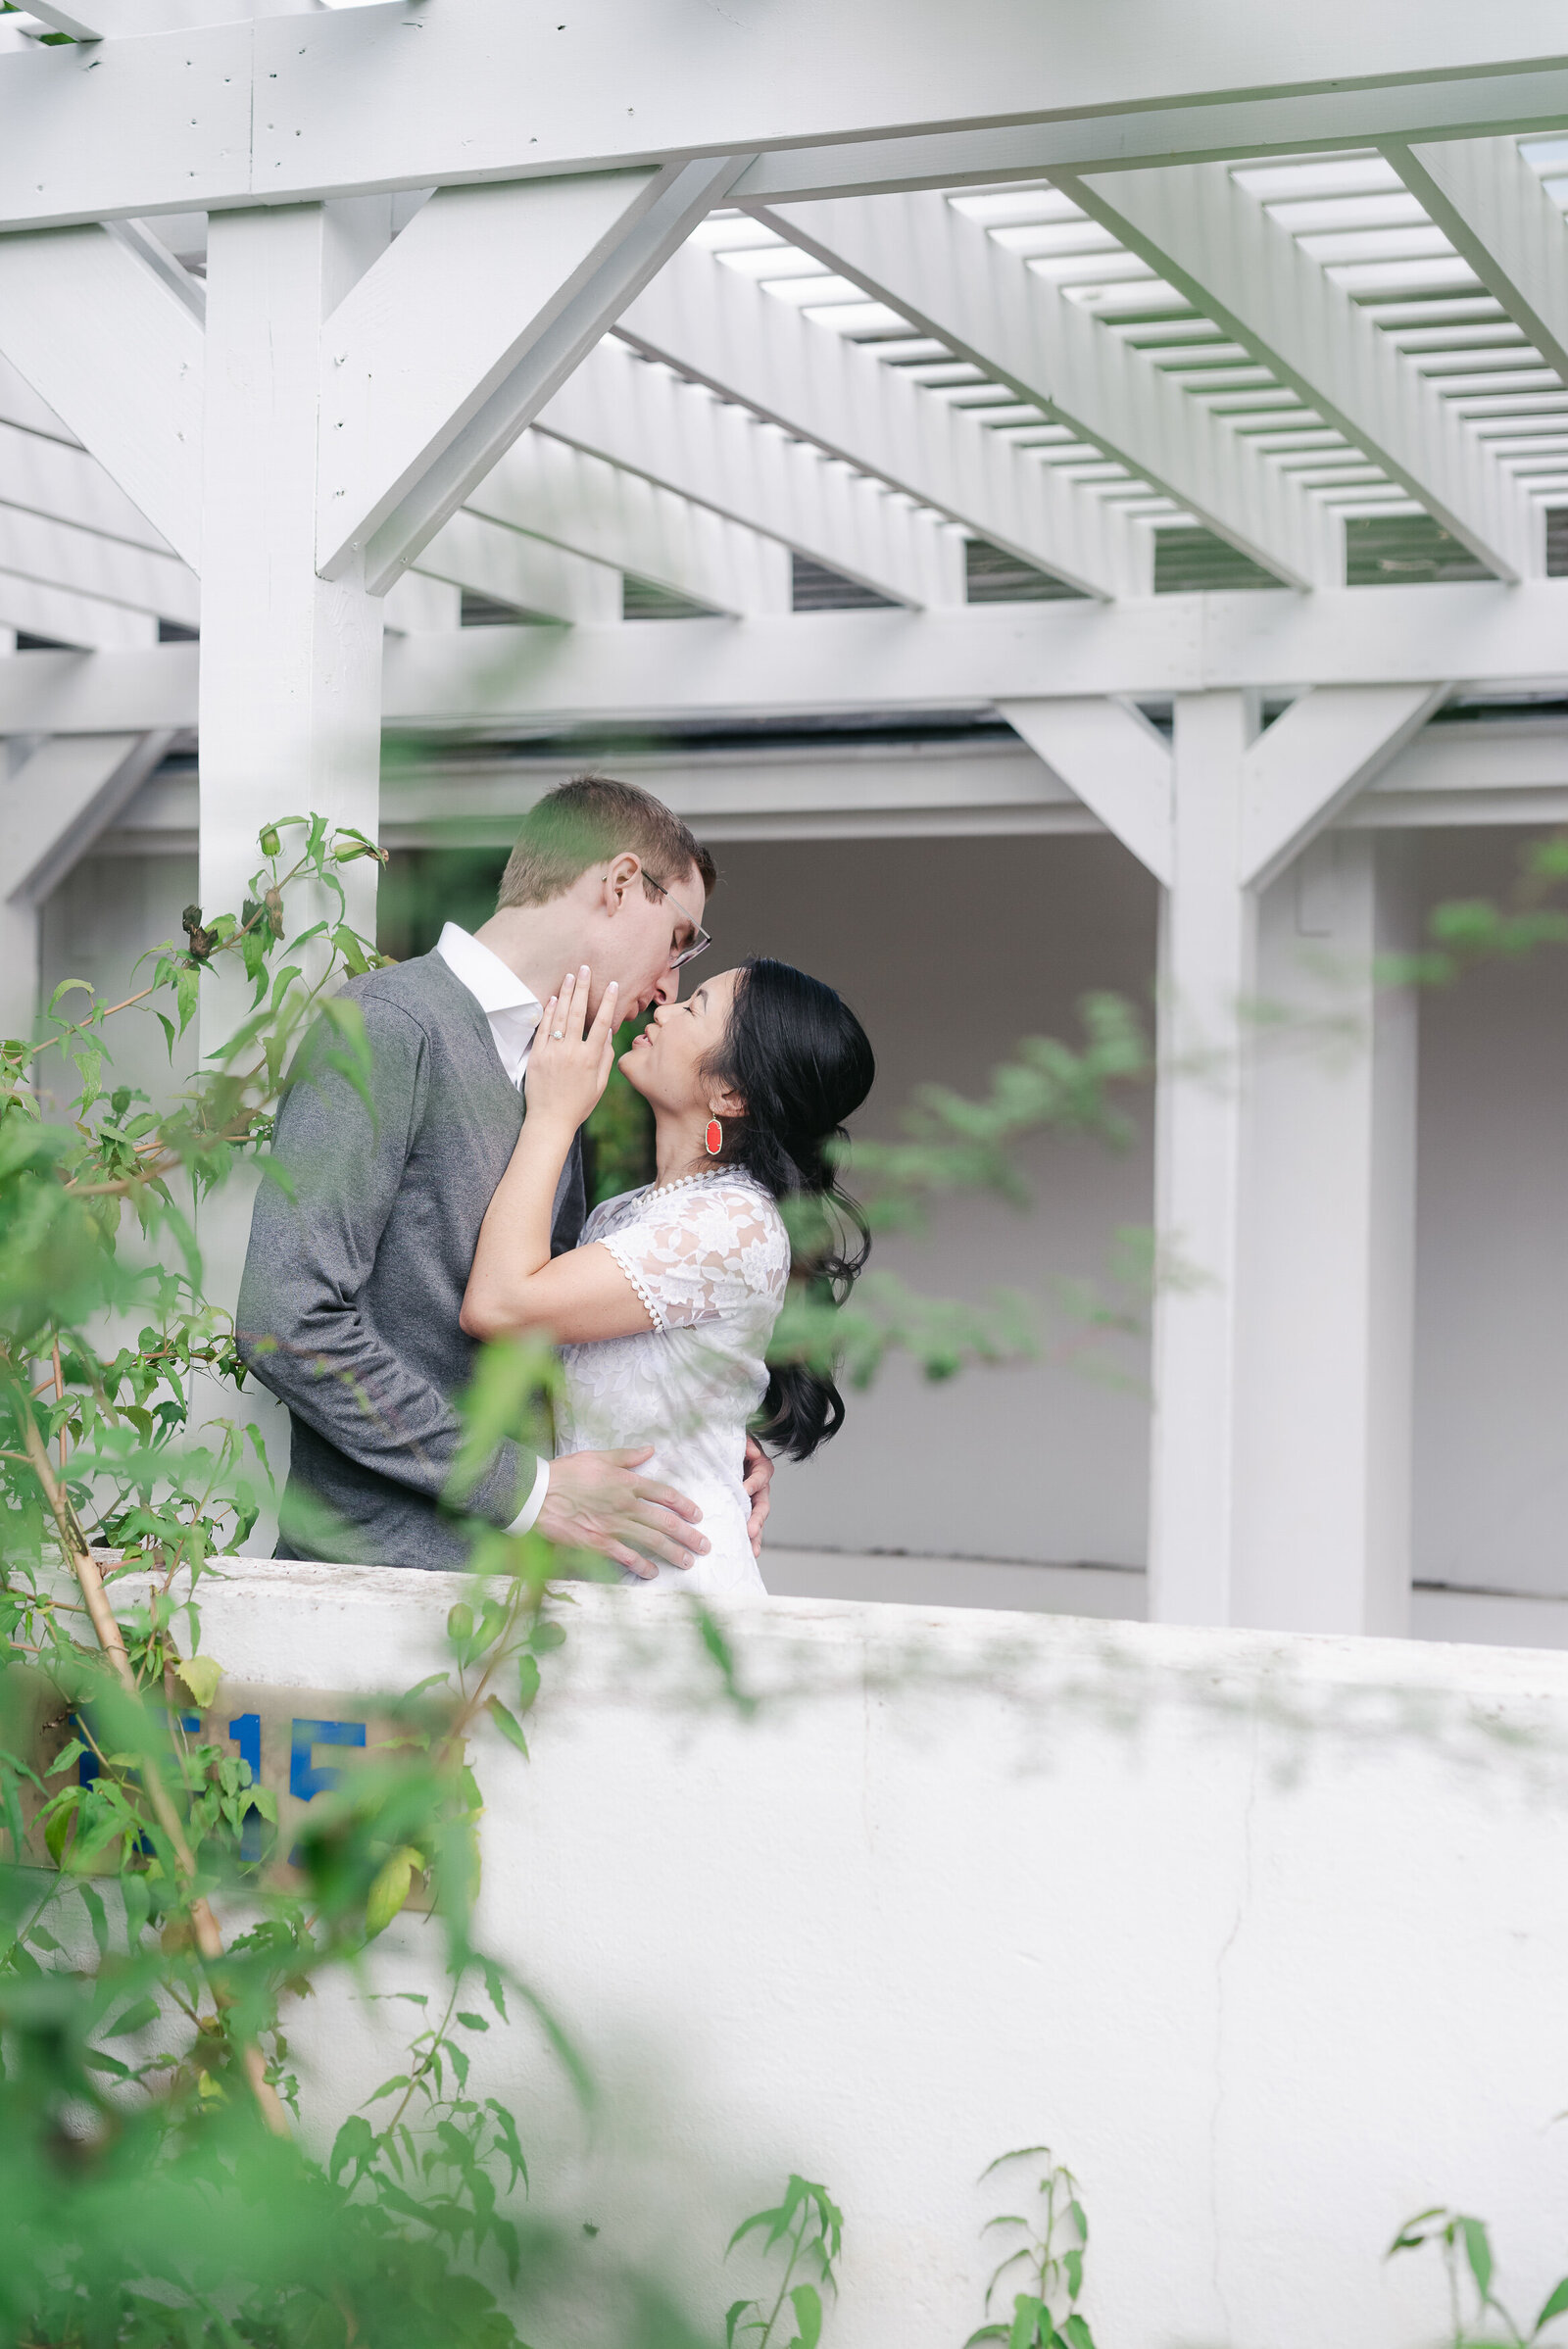 jen-symes-engagement-texas-discovery-gardens-29